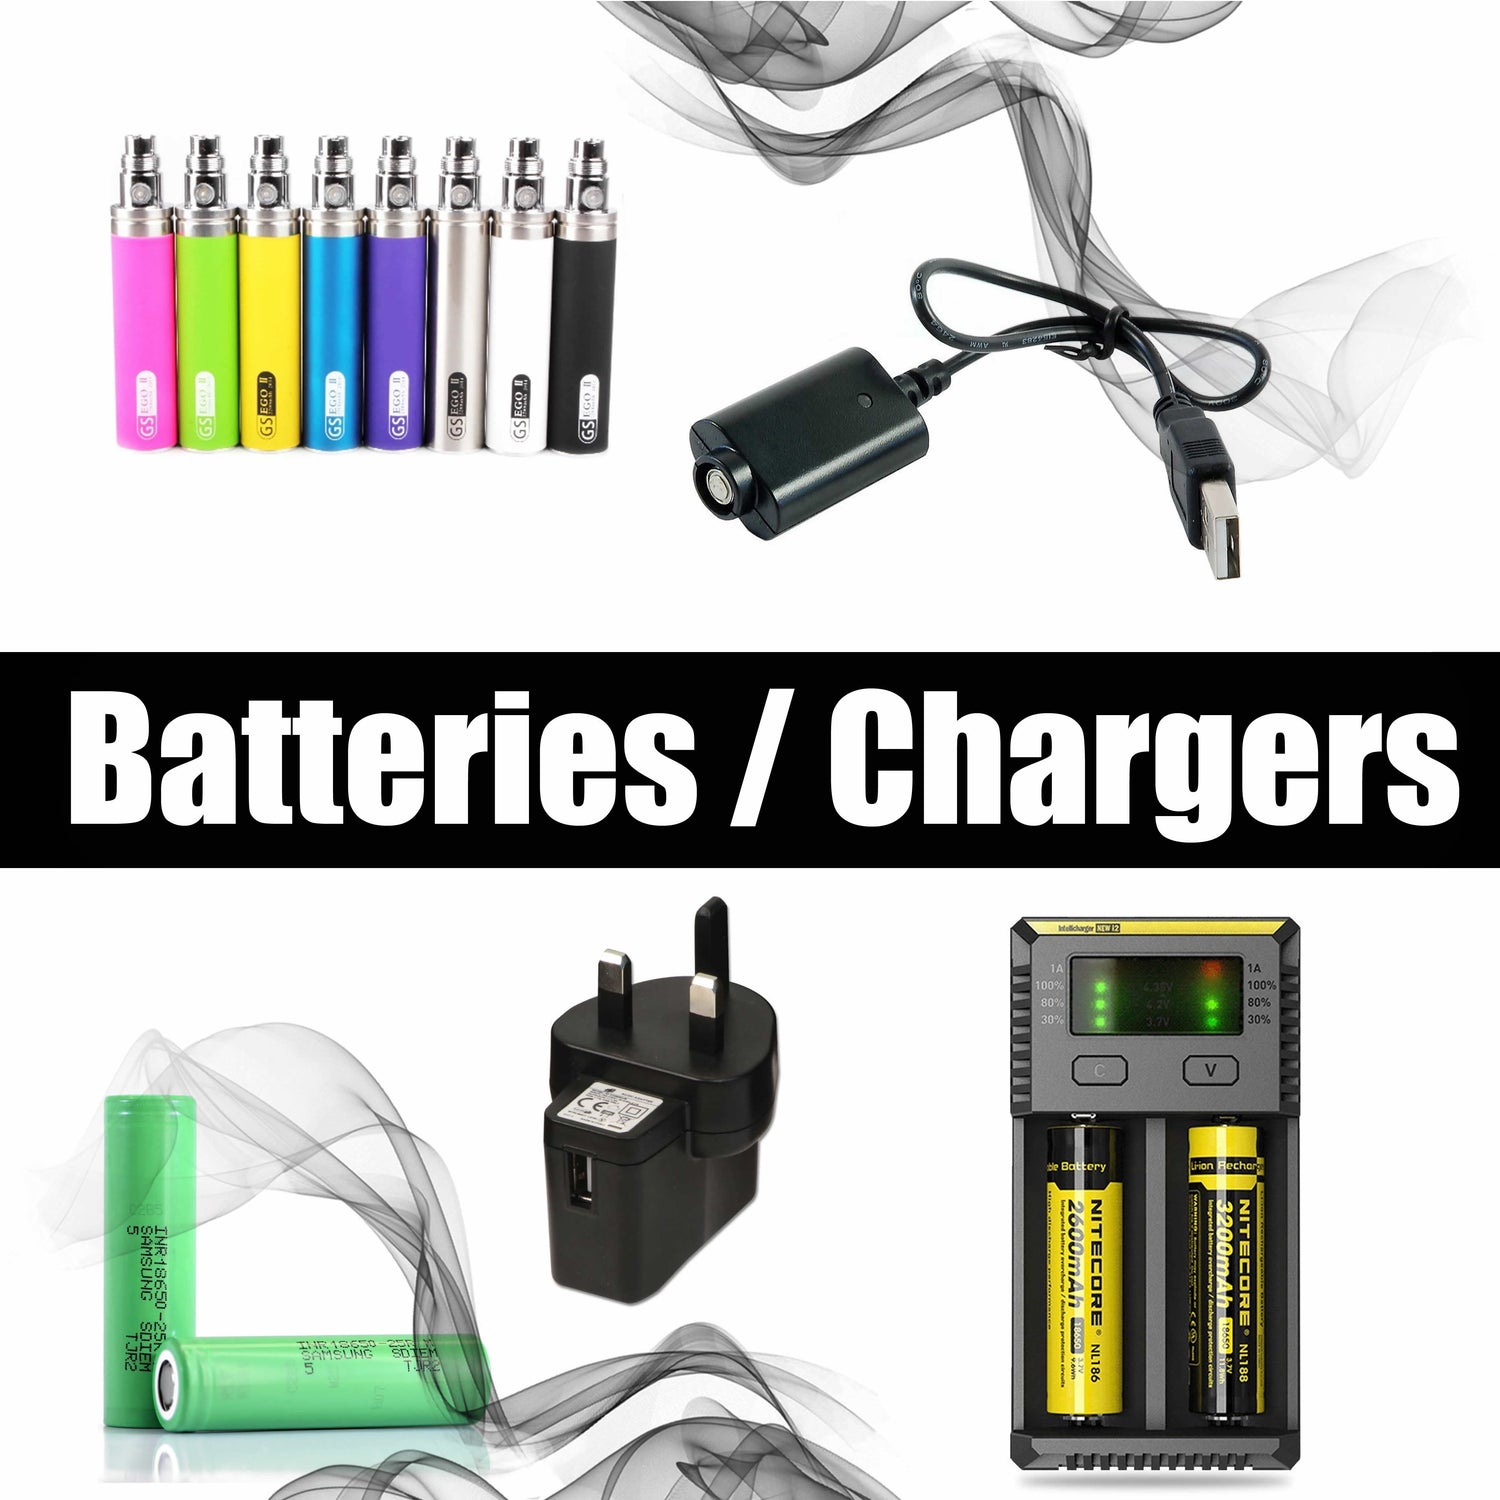 Batteries / Chargers